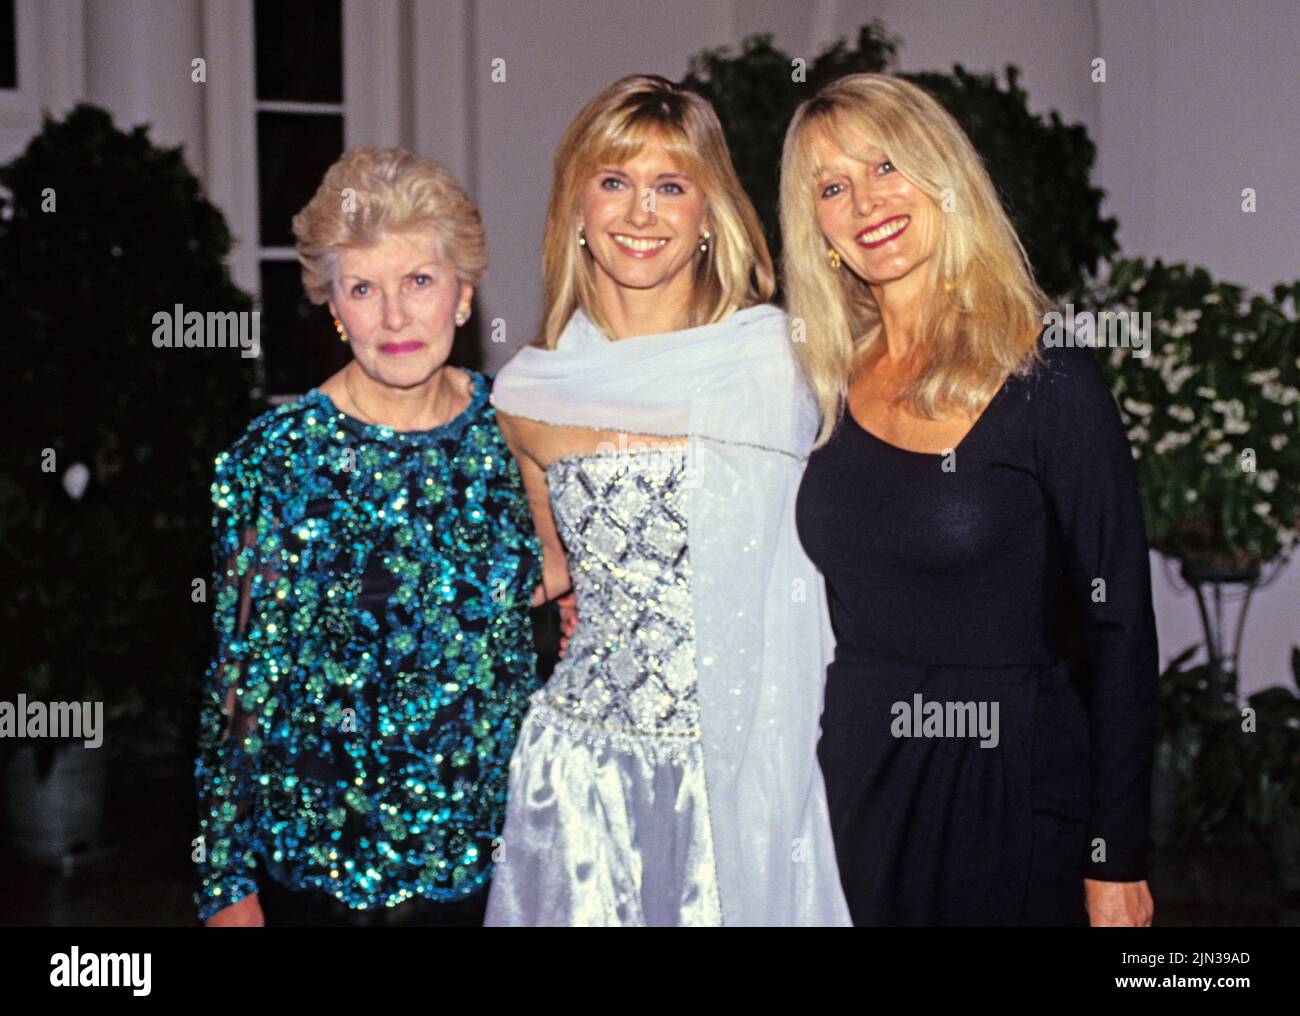 Australian singer, songwriter and actress Olivia Newton-John, center, arrives for the State Dinner hosted by United States President George H.W. Bush and first lady Barbara Bush honoring President Václav Havel of Czechoslovakia at the White House in Washington, DC with her mother, Irene Newton-John, left, and sister, Rona Newton-John, right, on October 22, 1991.Credit: Ron Sachs/CNP/Sipa USA Credit: Sipa USA/Alamy Live News Stock Photo